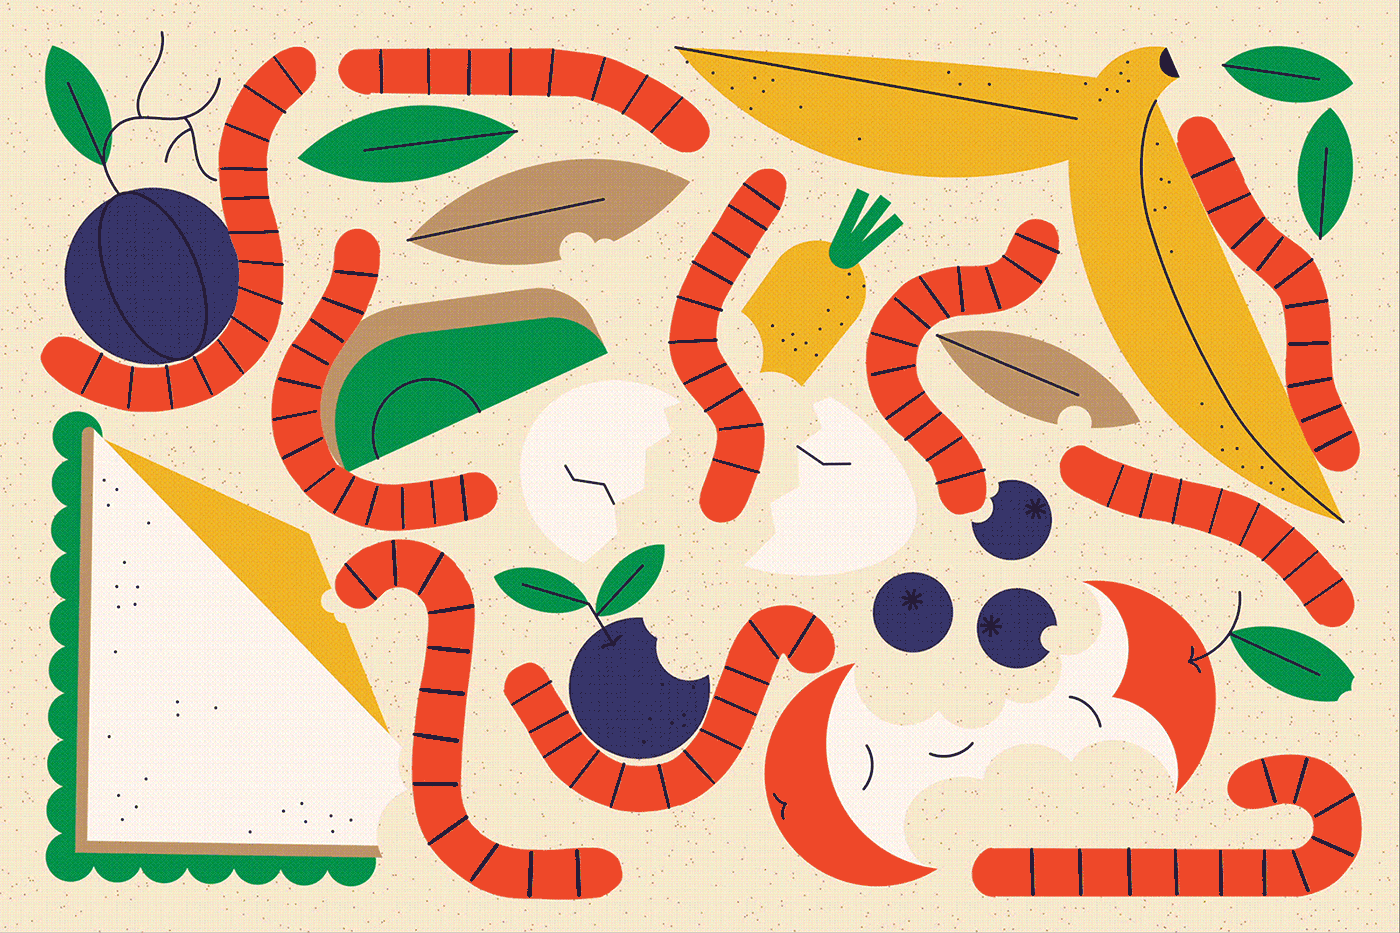 An animated drawing of worms nibbling on avocados, bread, eggs and carrots